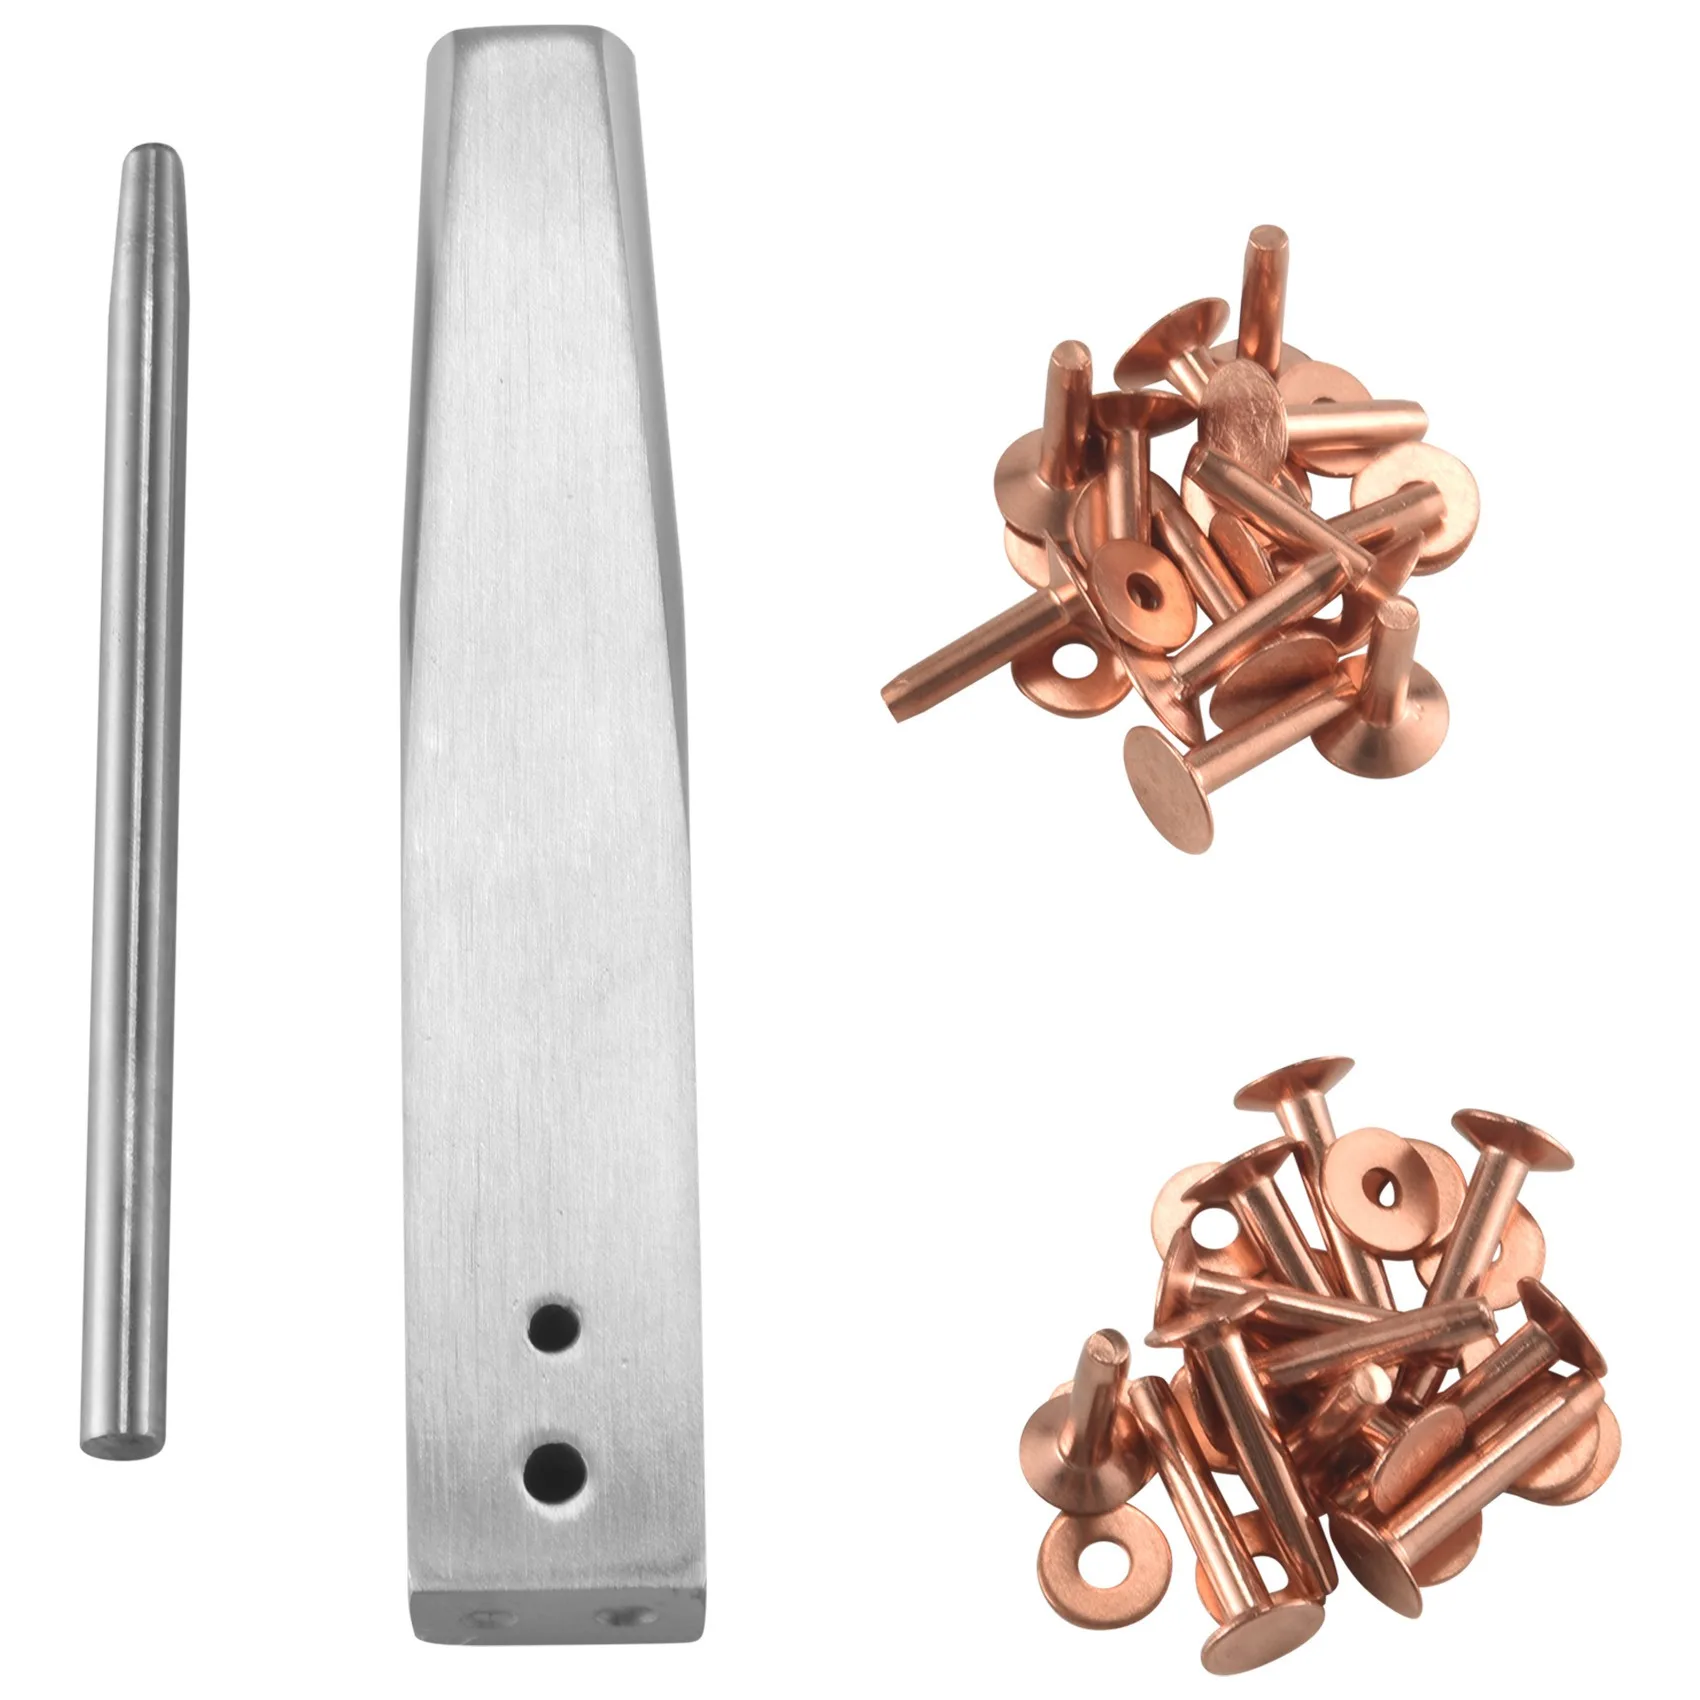 

Red Copper Rivet and Burr with Burr Setter Copper Rivet Fastener Install Setting Tool and Hole Punch Cutter